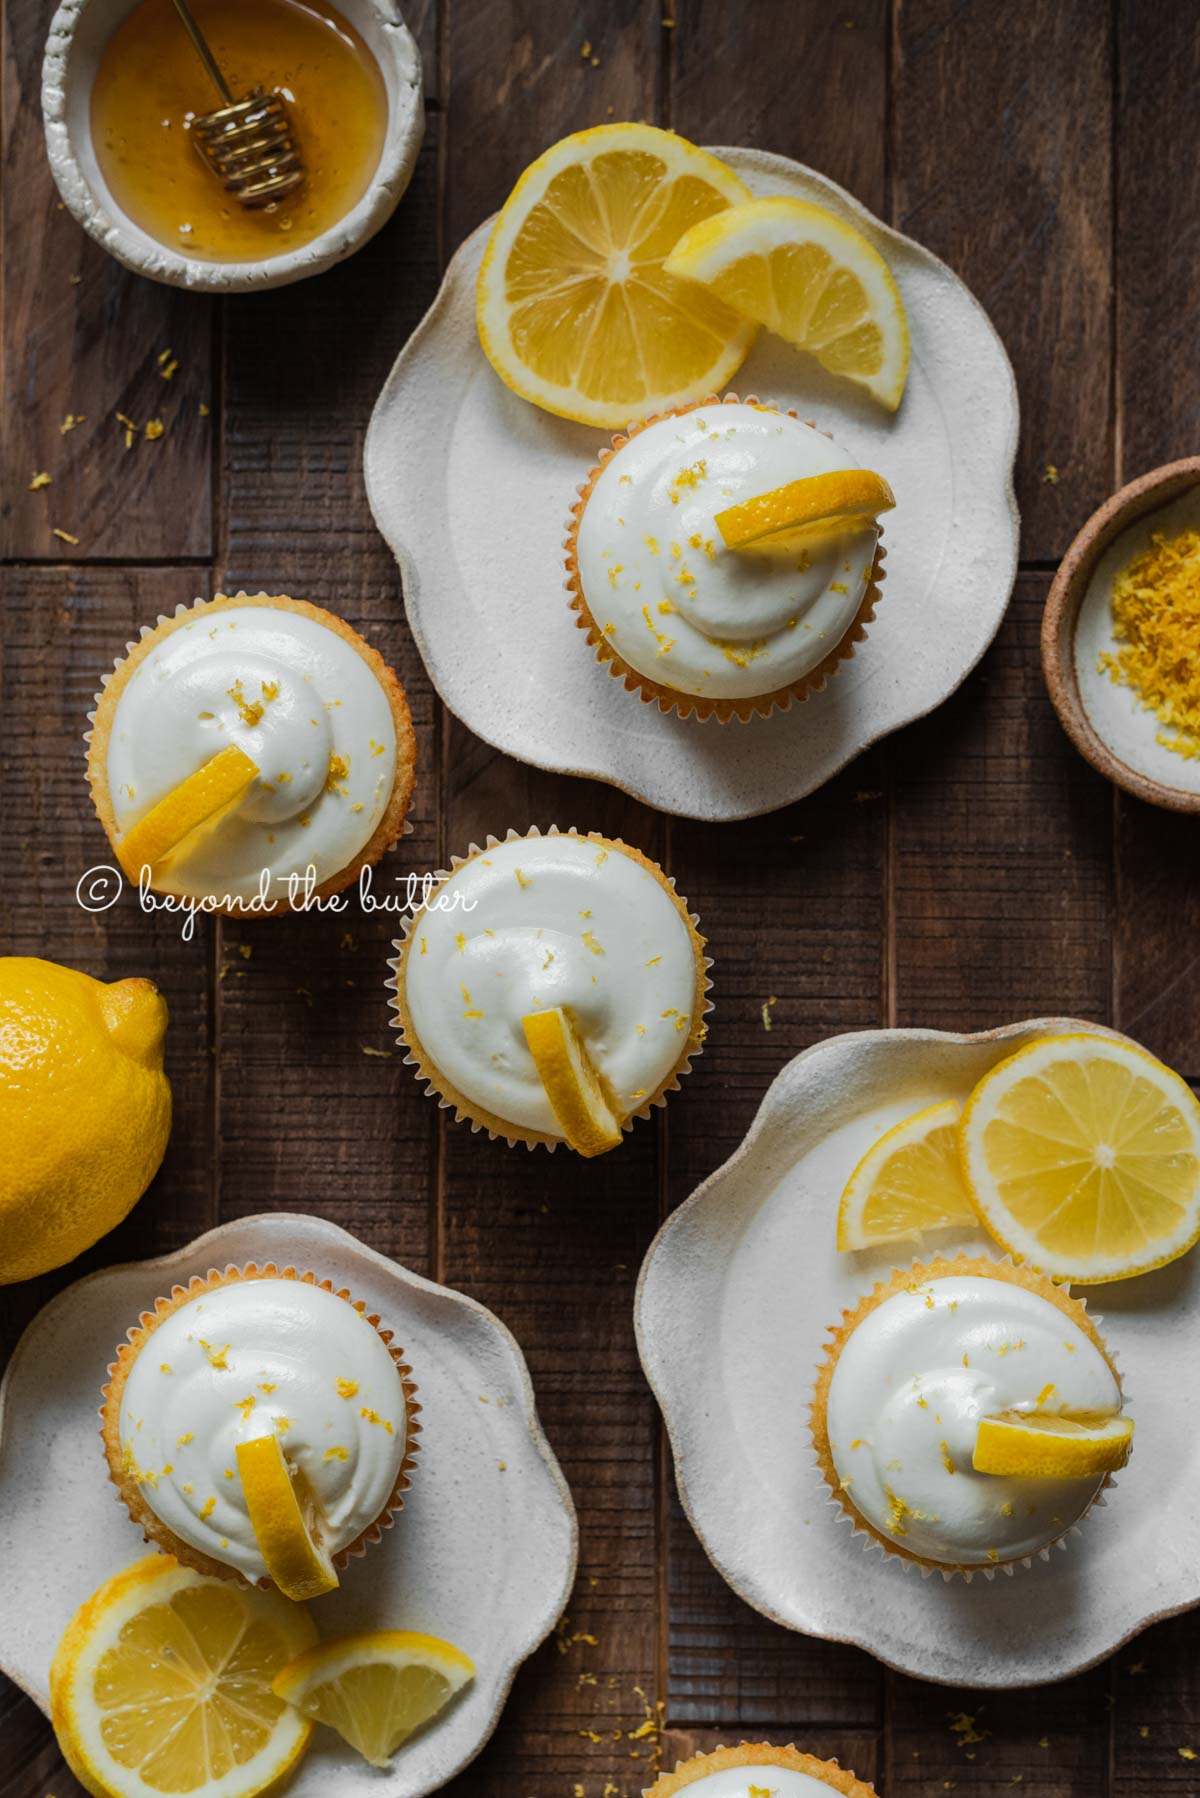 Randomly placed lemon cupcakes with lemon cream cheese frosting, garnished with lemon triangles on a dark wood background | All Images © Beyond the Butter®